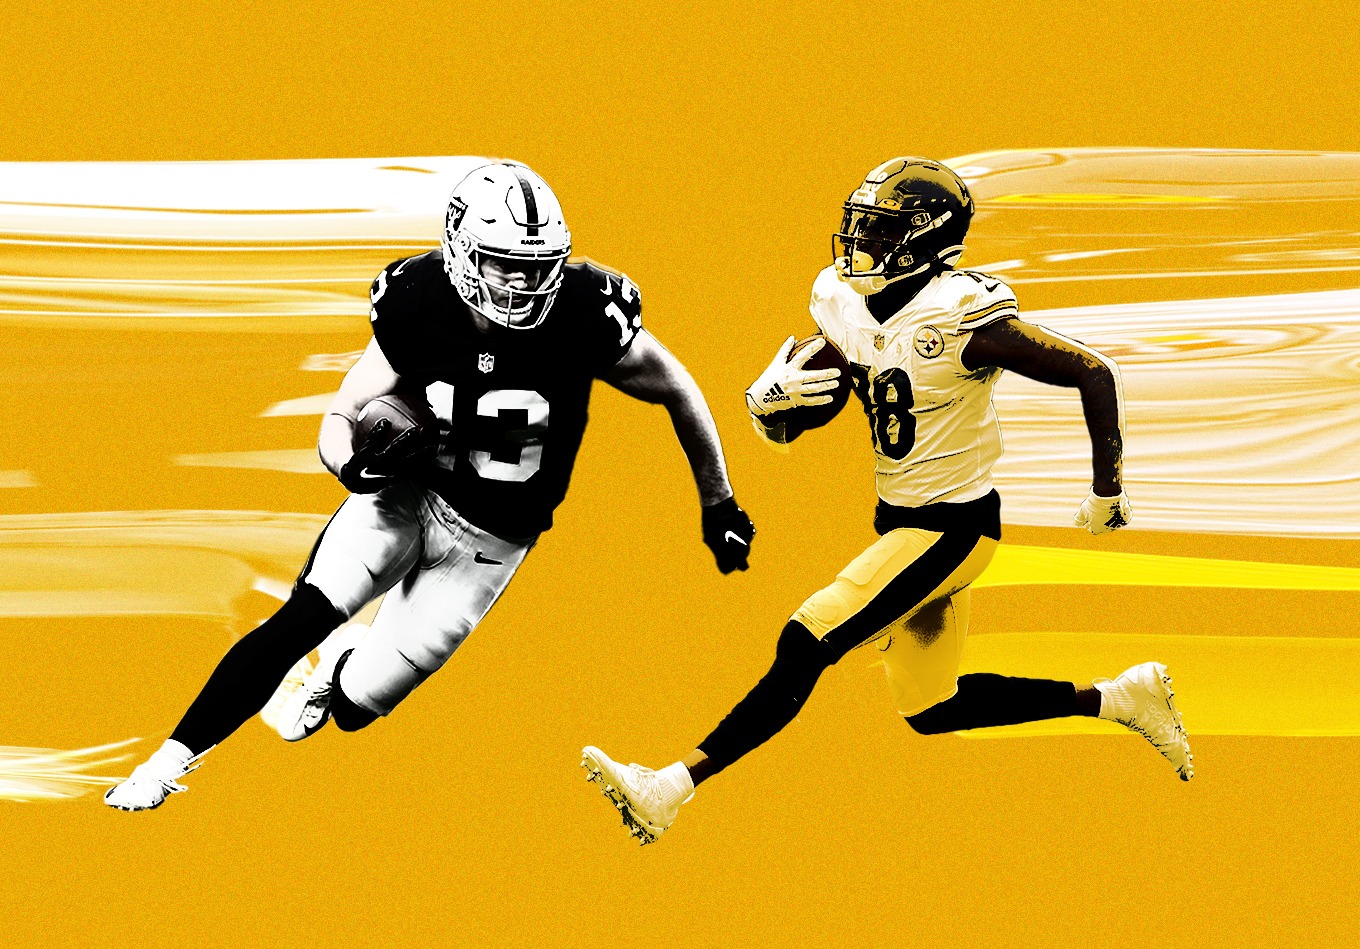 The Yays and Nays: Our Week 9 Fantasy Football Projections, Top Plays and DFS Picks